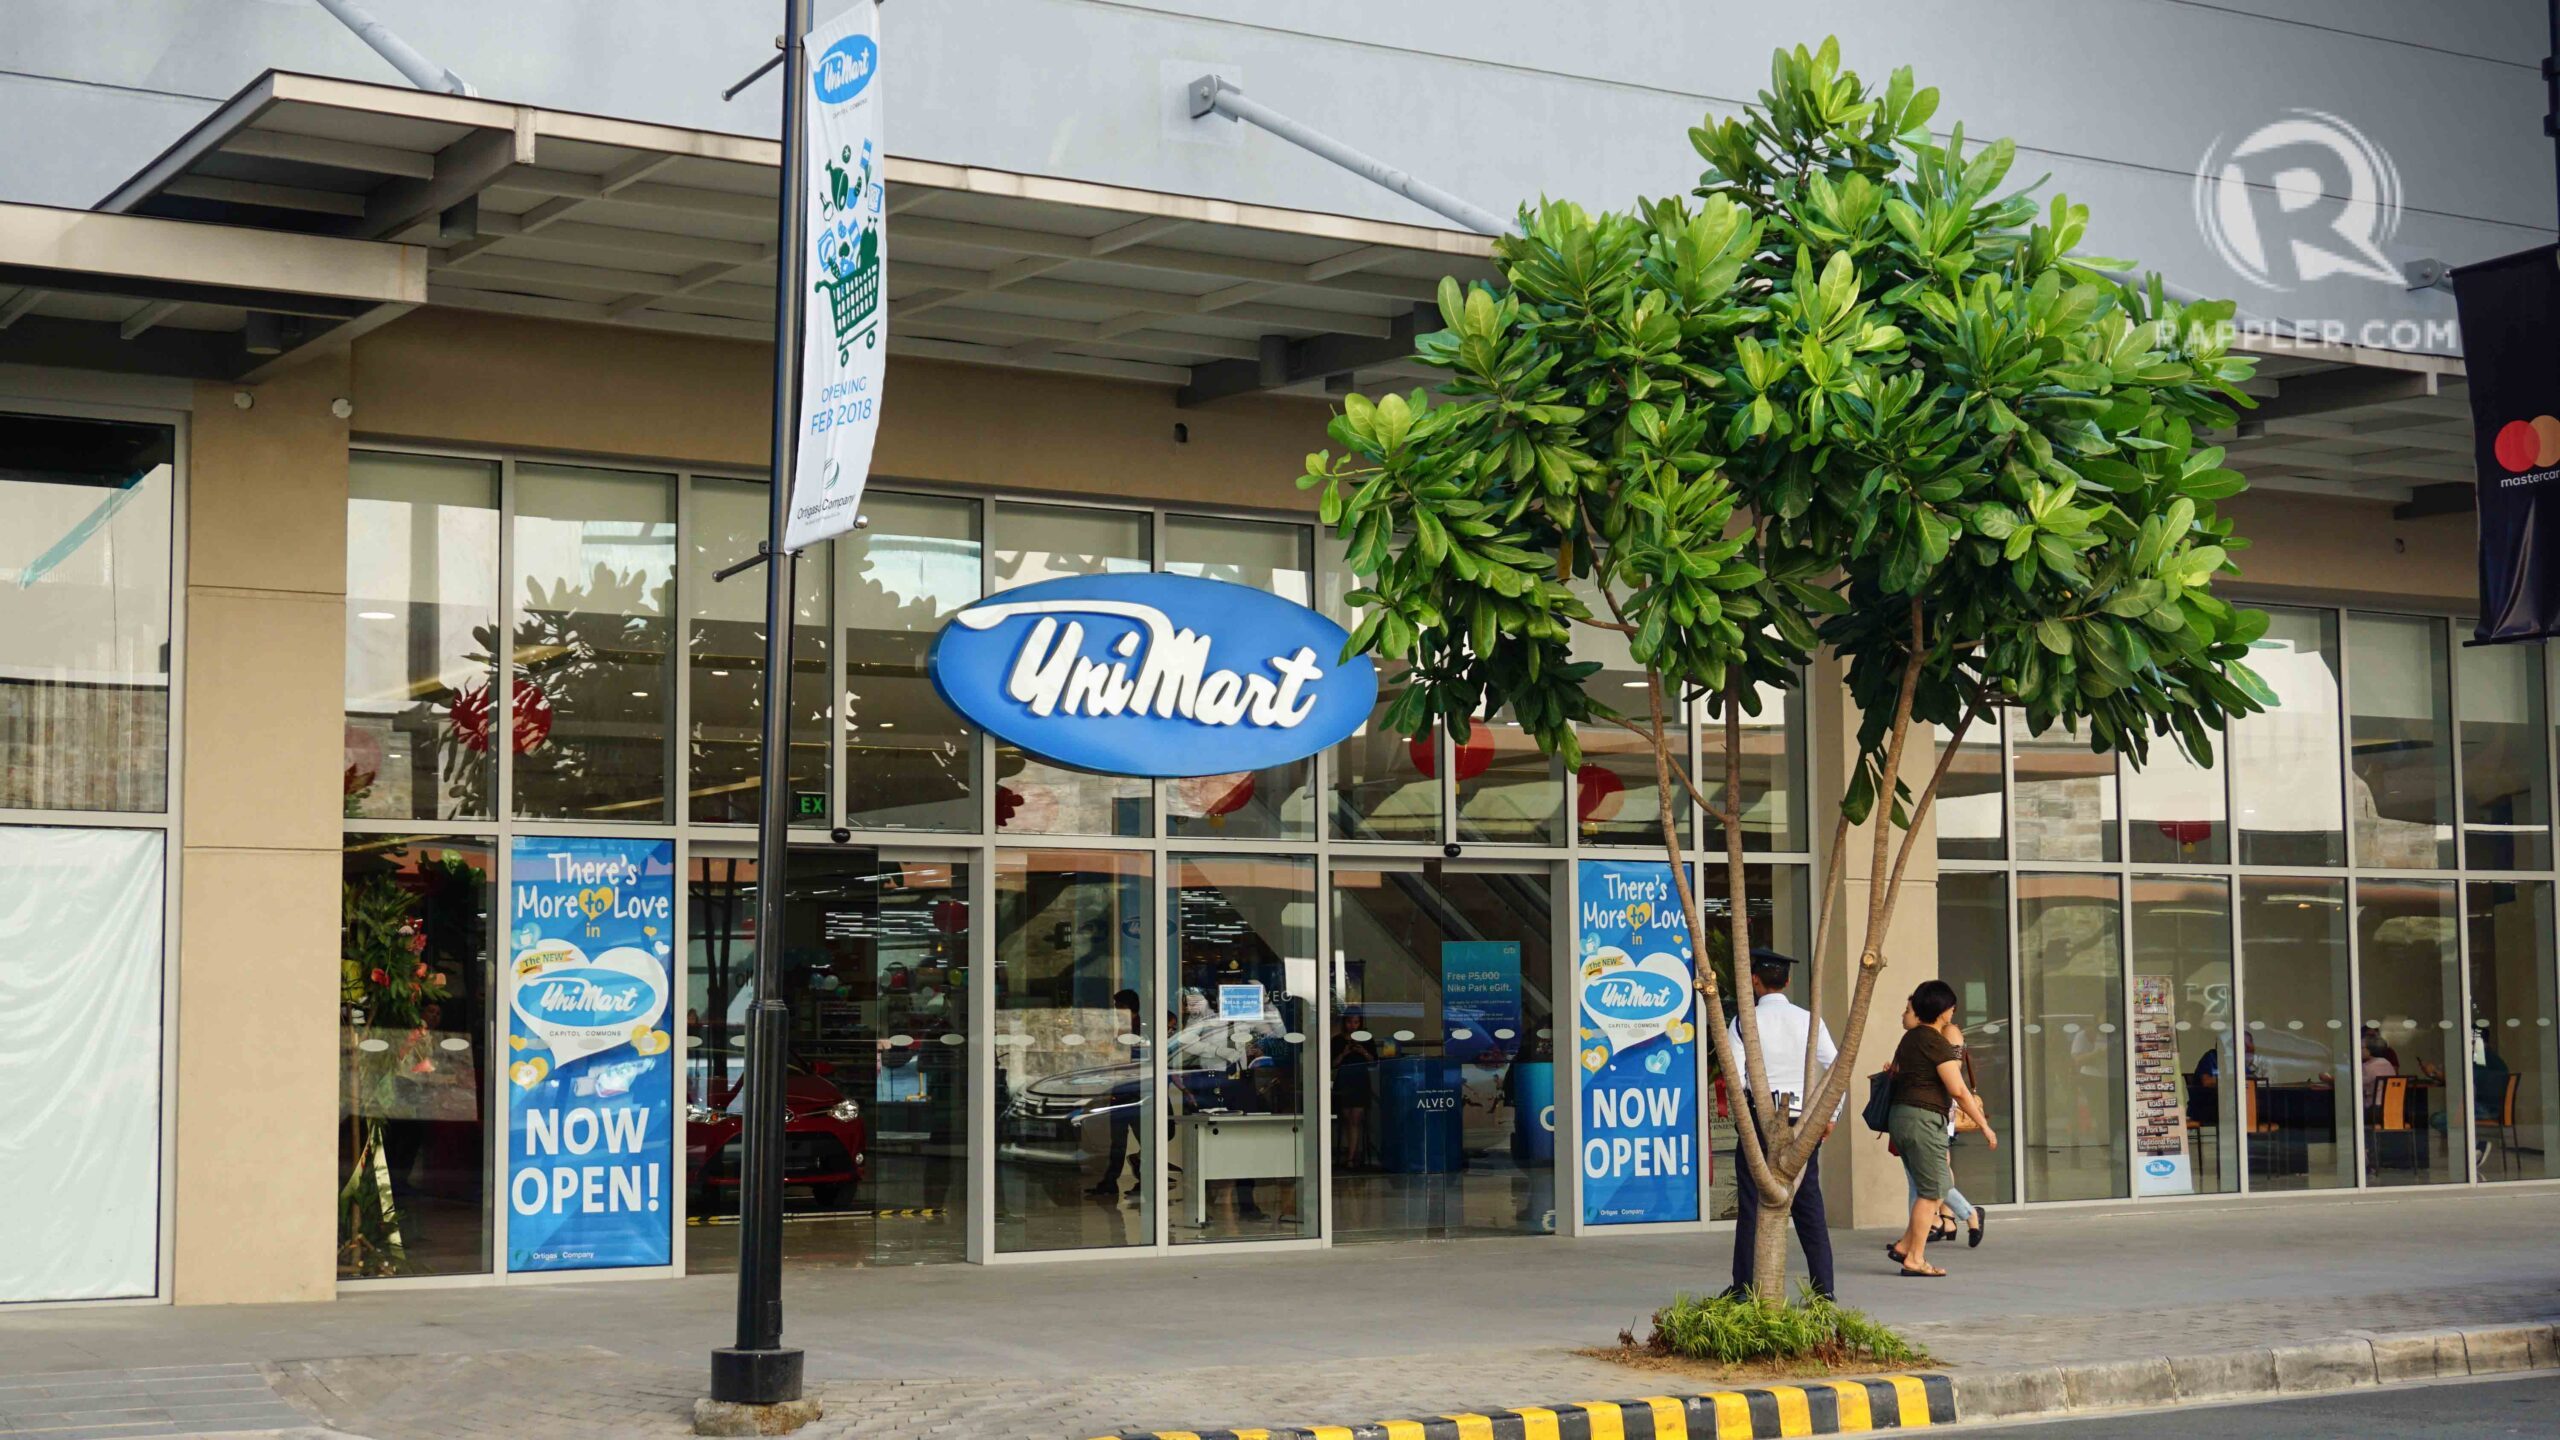 IN PHOTOS: Inside Unimart at Capitol Commons